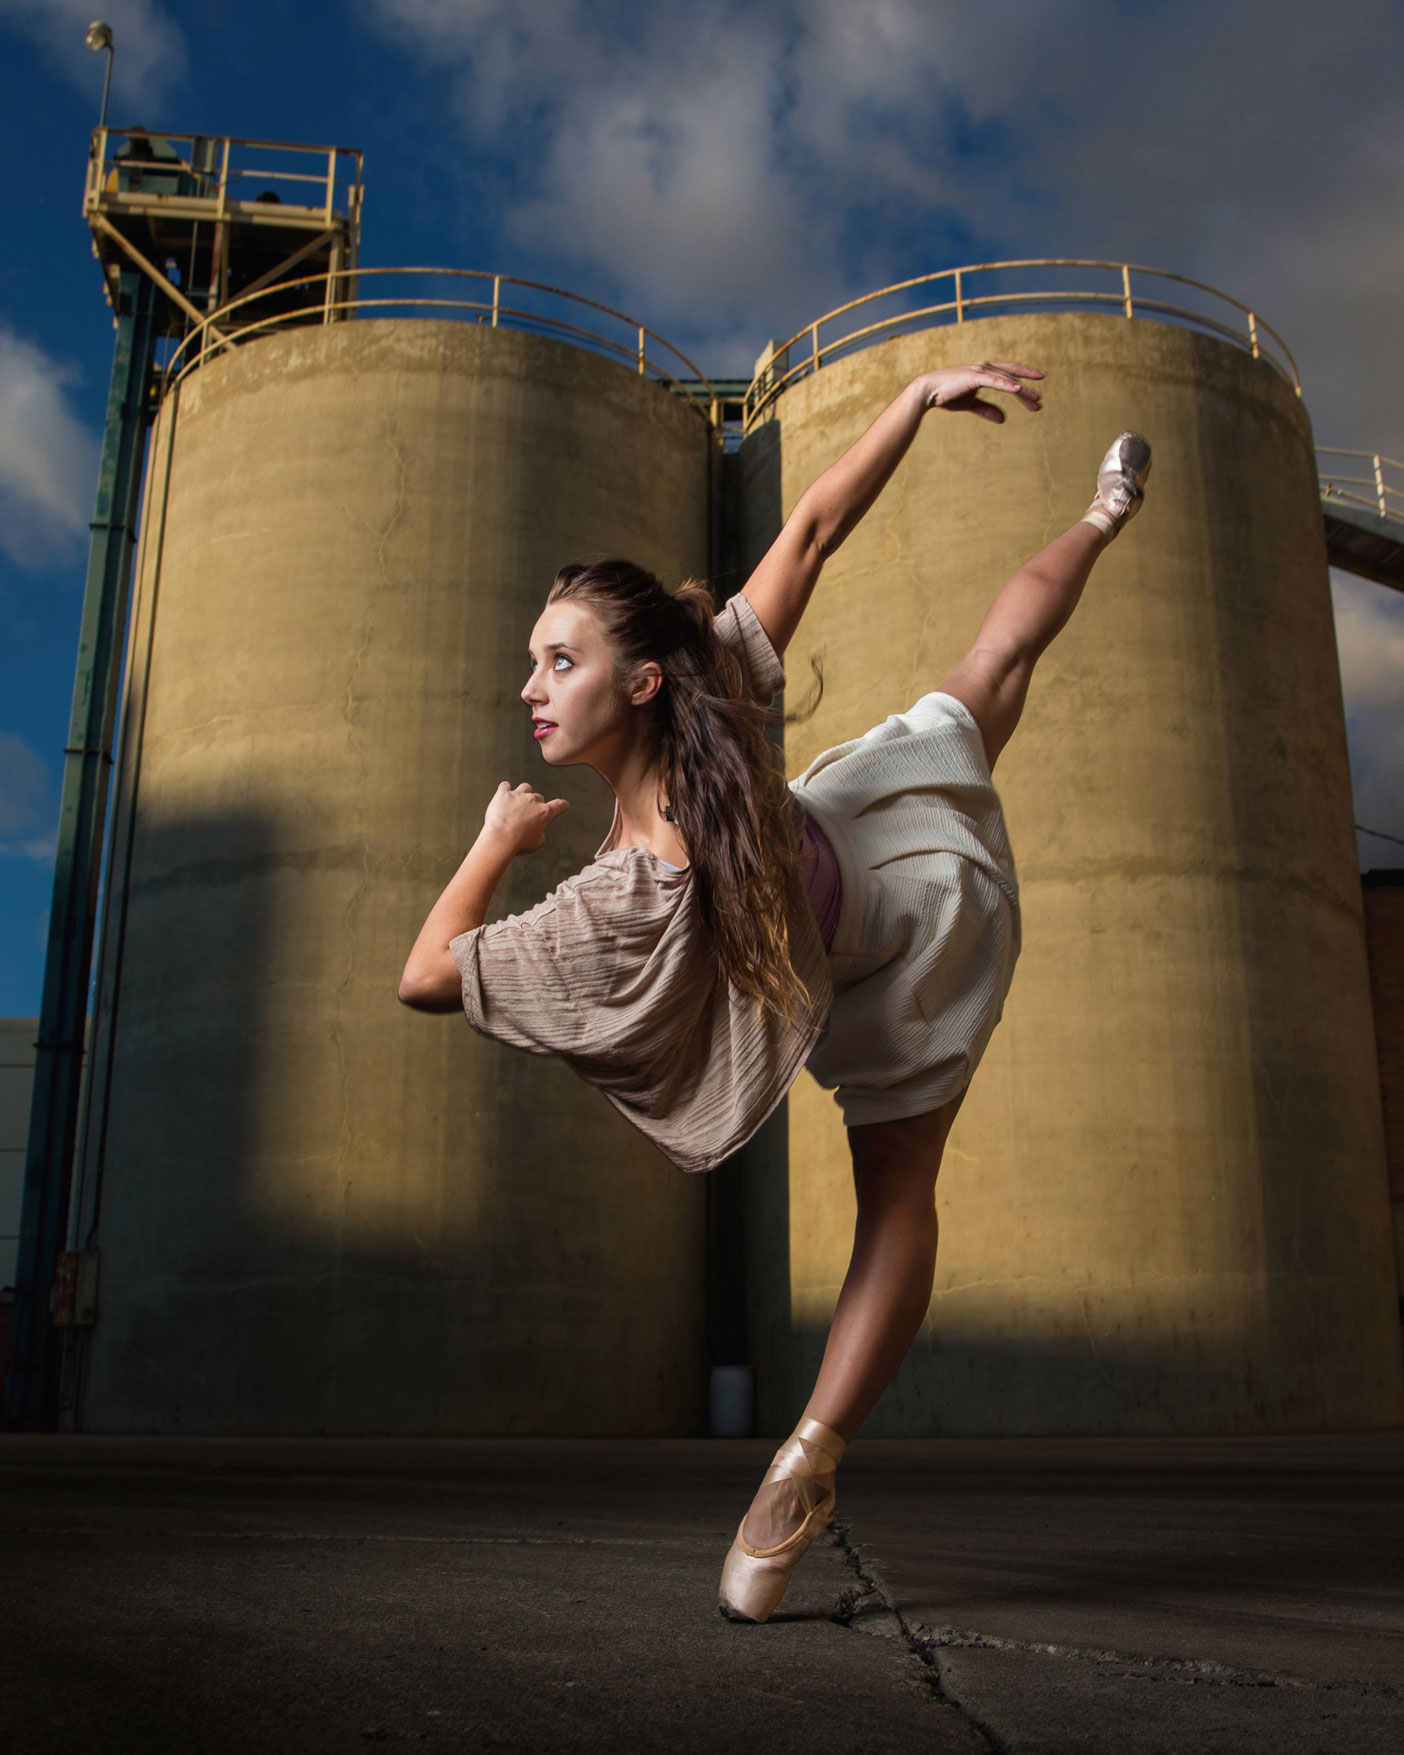 A modern dancer in front of a power plant